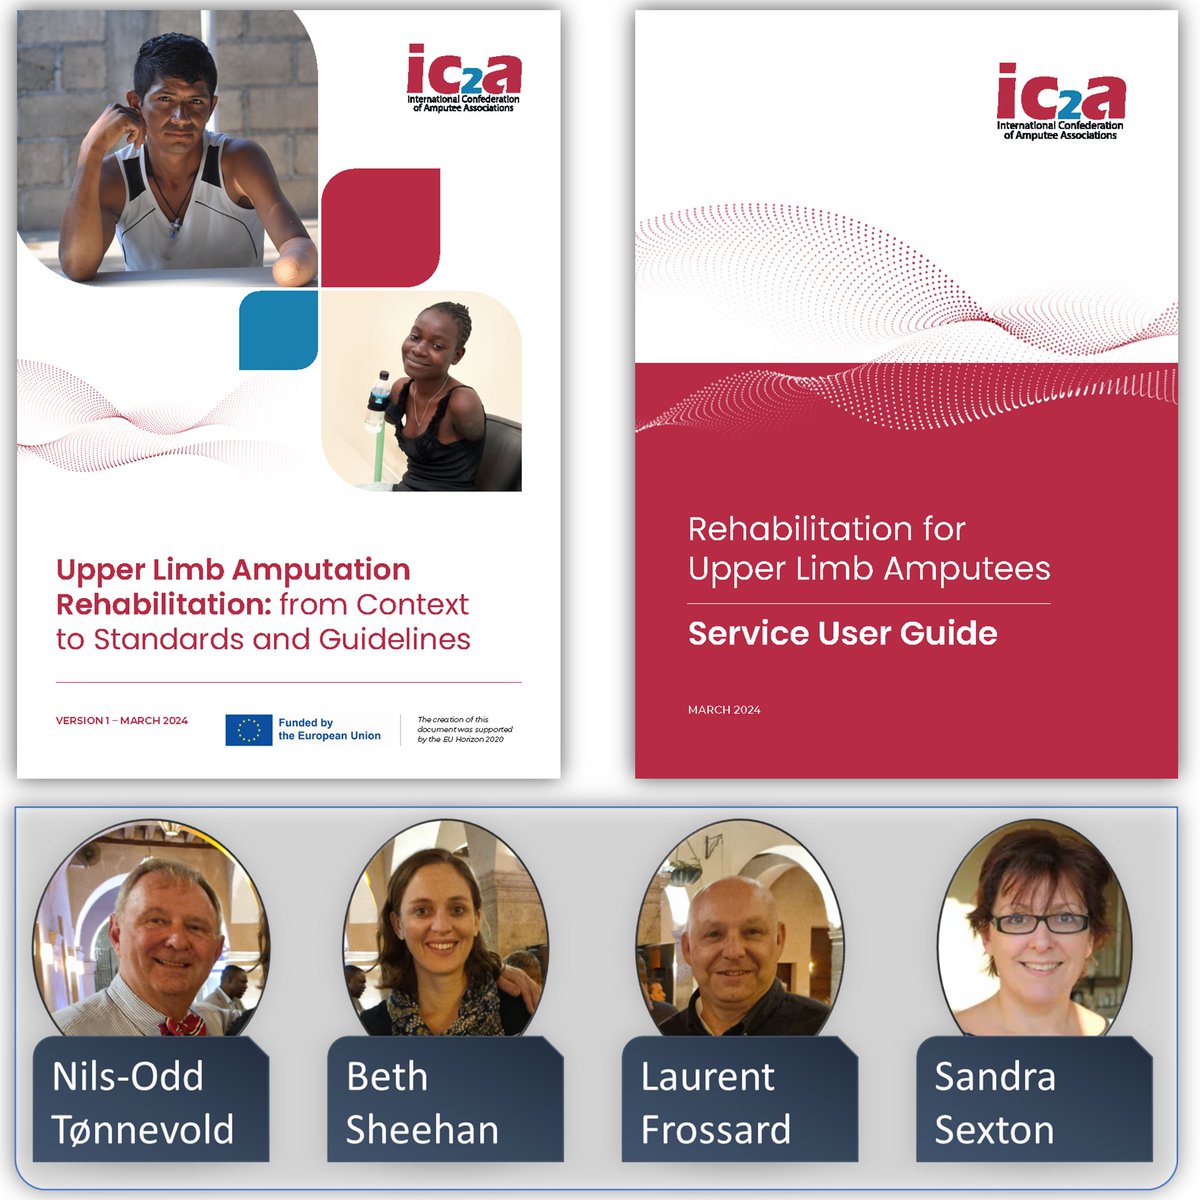 Unique resources about upper limb amputation rehabilitation now available: Perfect for end-users and clinicians! I am very glad to be involved with a team of dedicated users and professionals. Access the guideline for fee from ic2a.eu/oneHand/